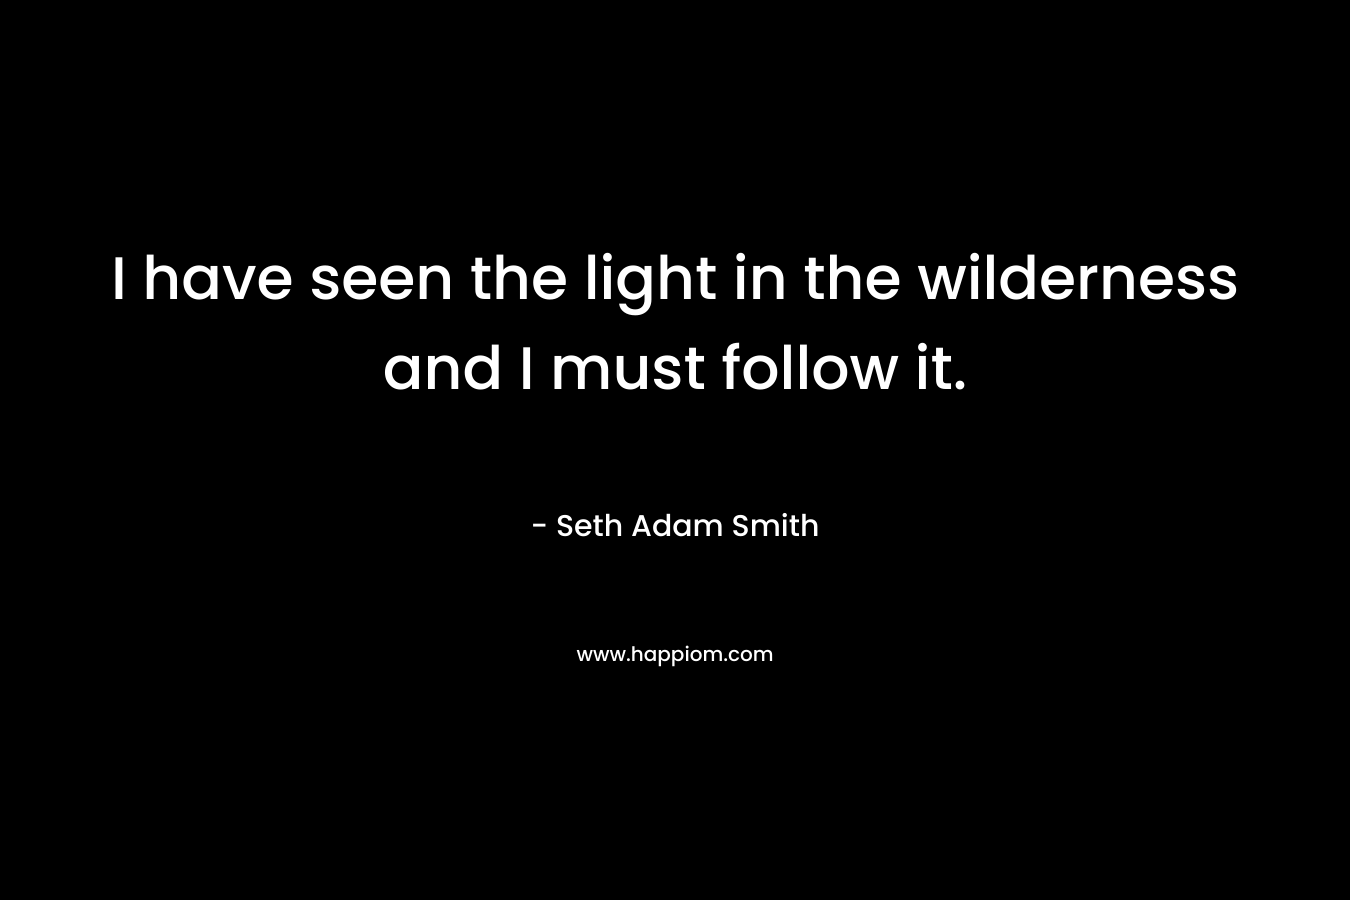 I have seen the light in the wilderness and I must follow it.